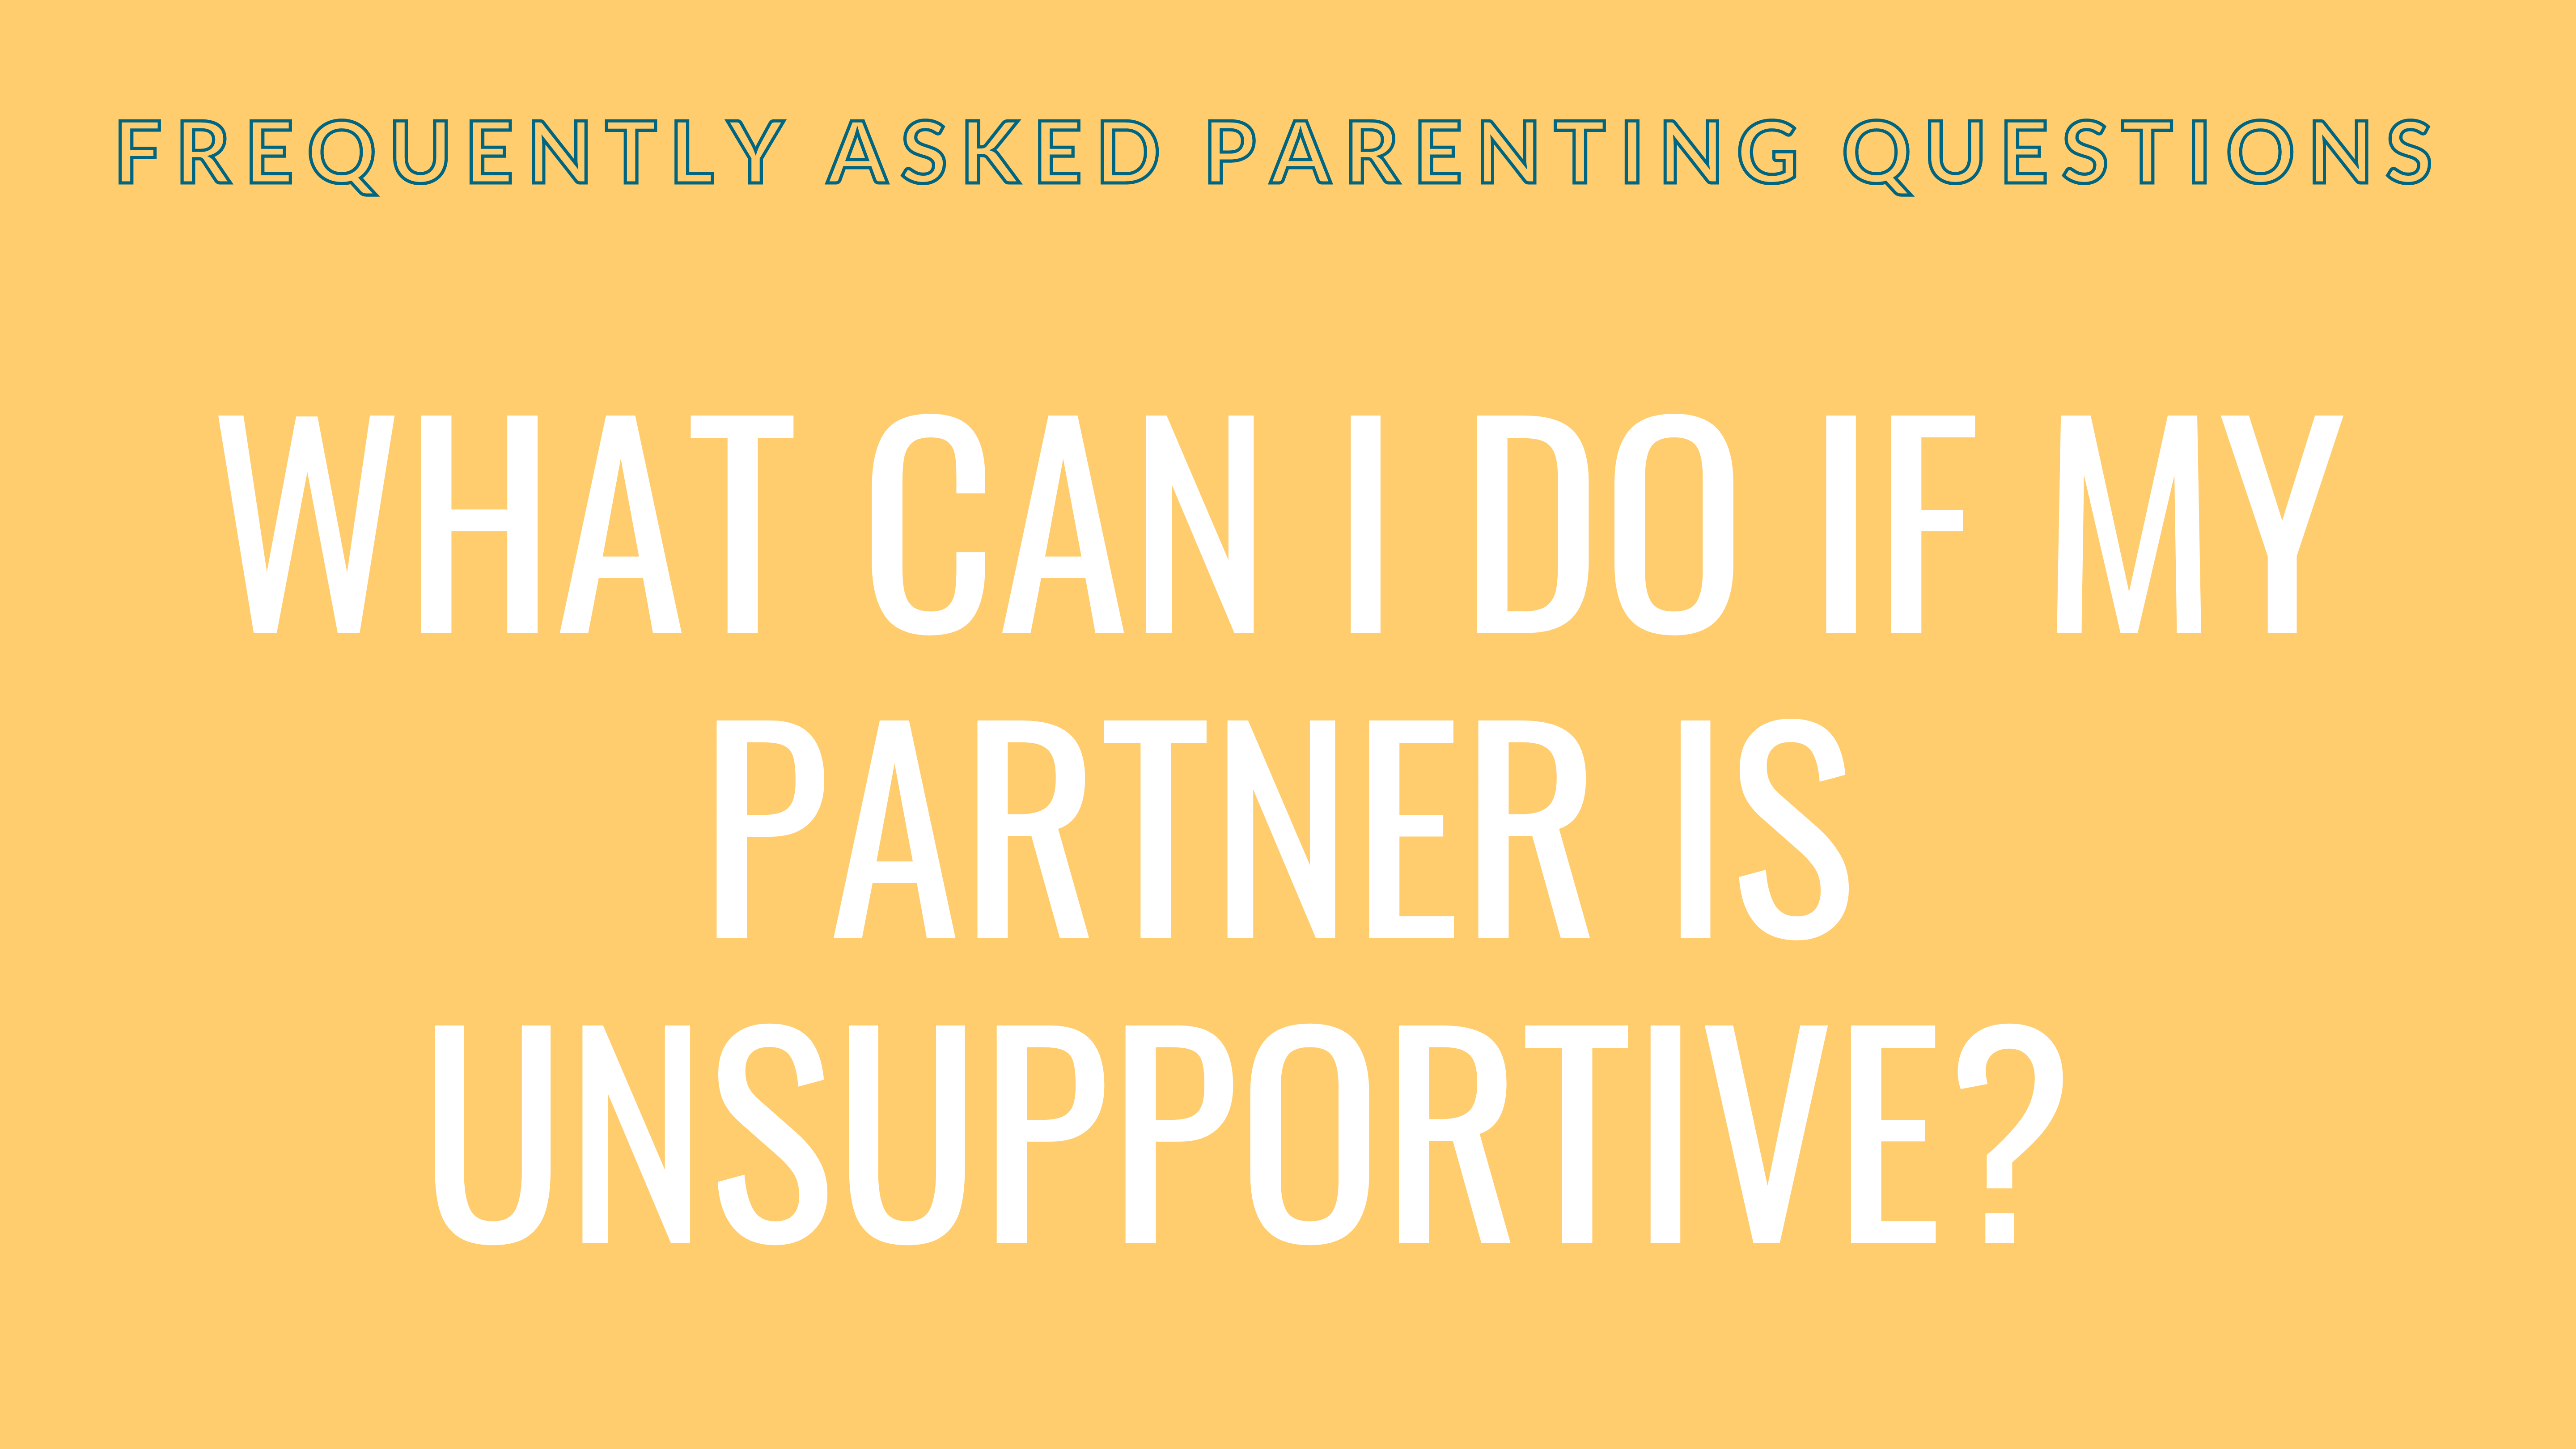 What can I do if my partner is unsupportive?